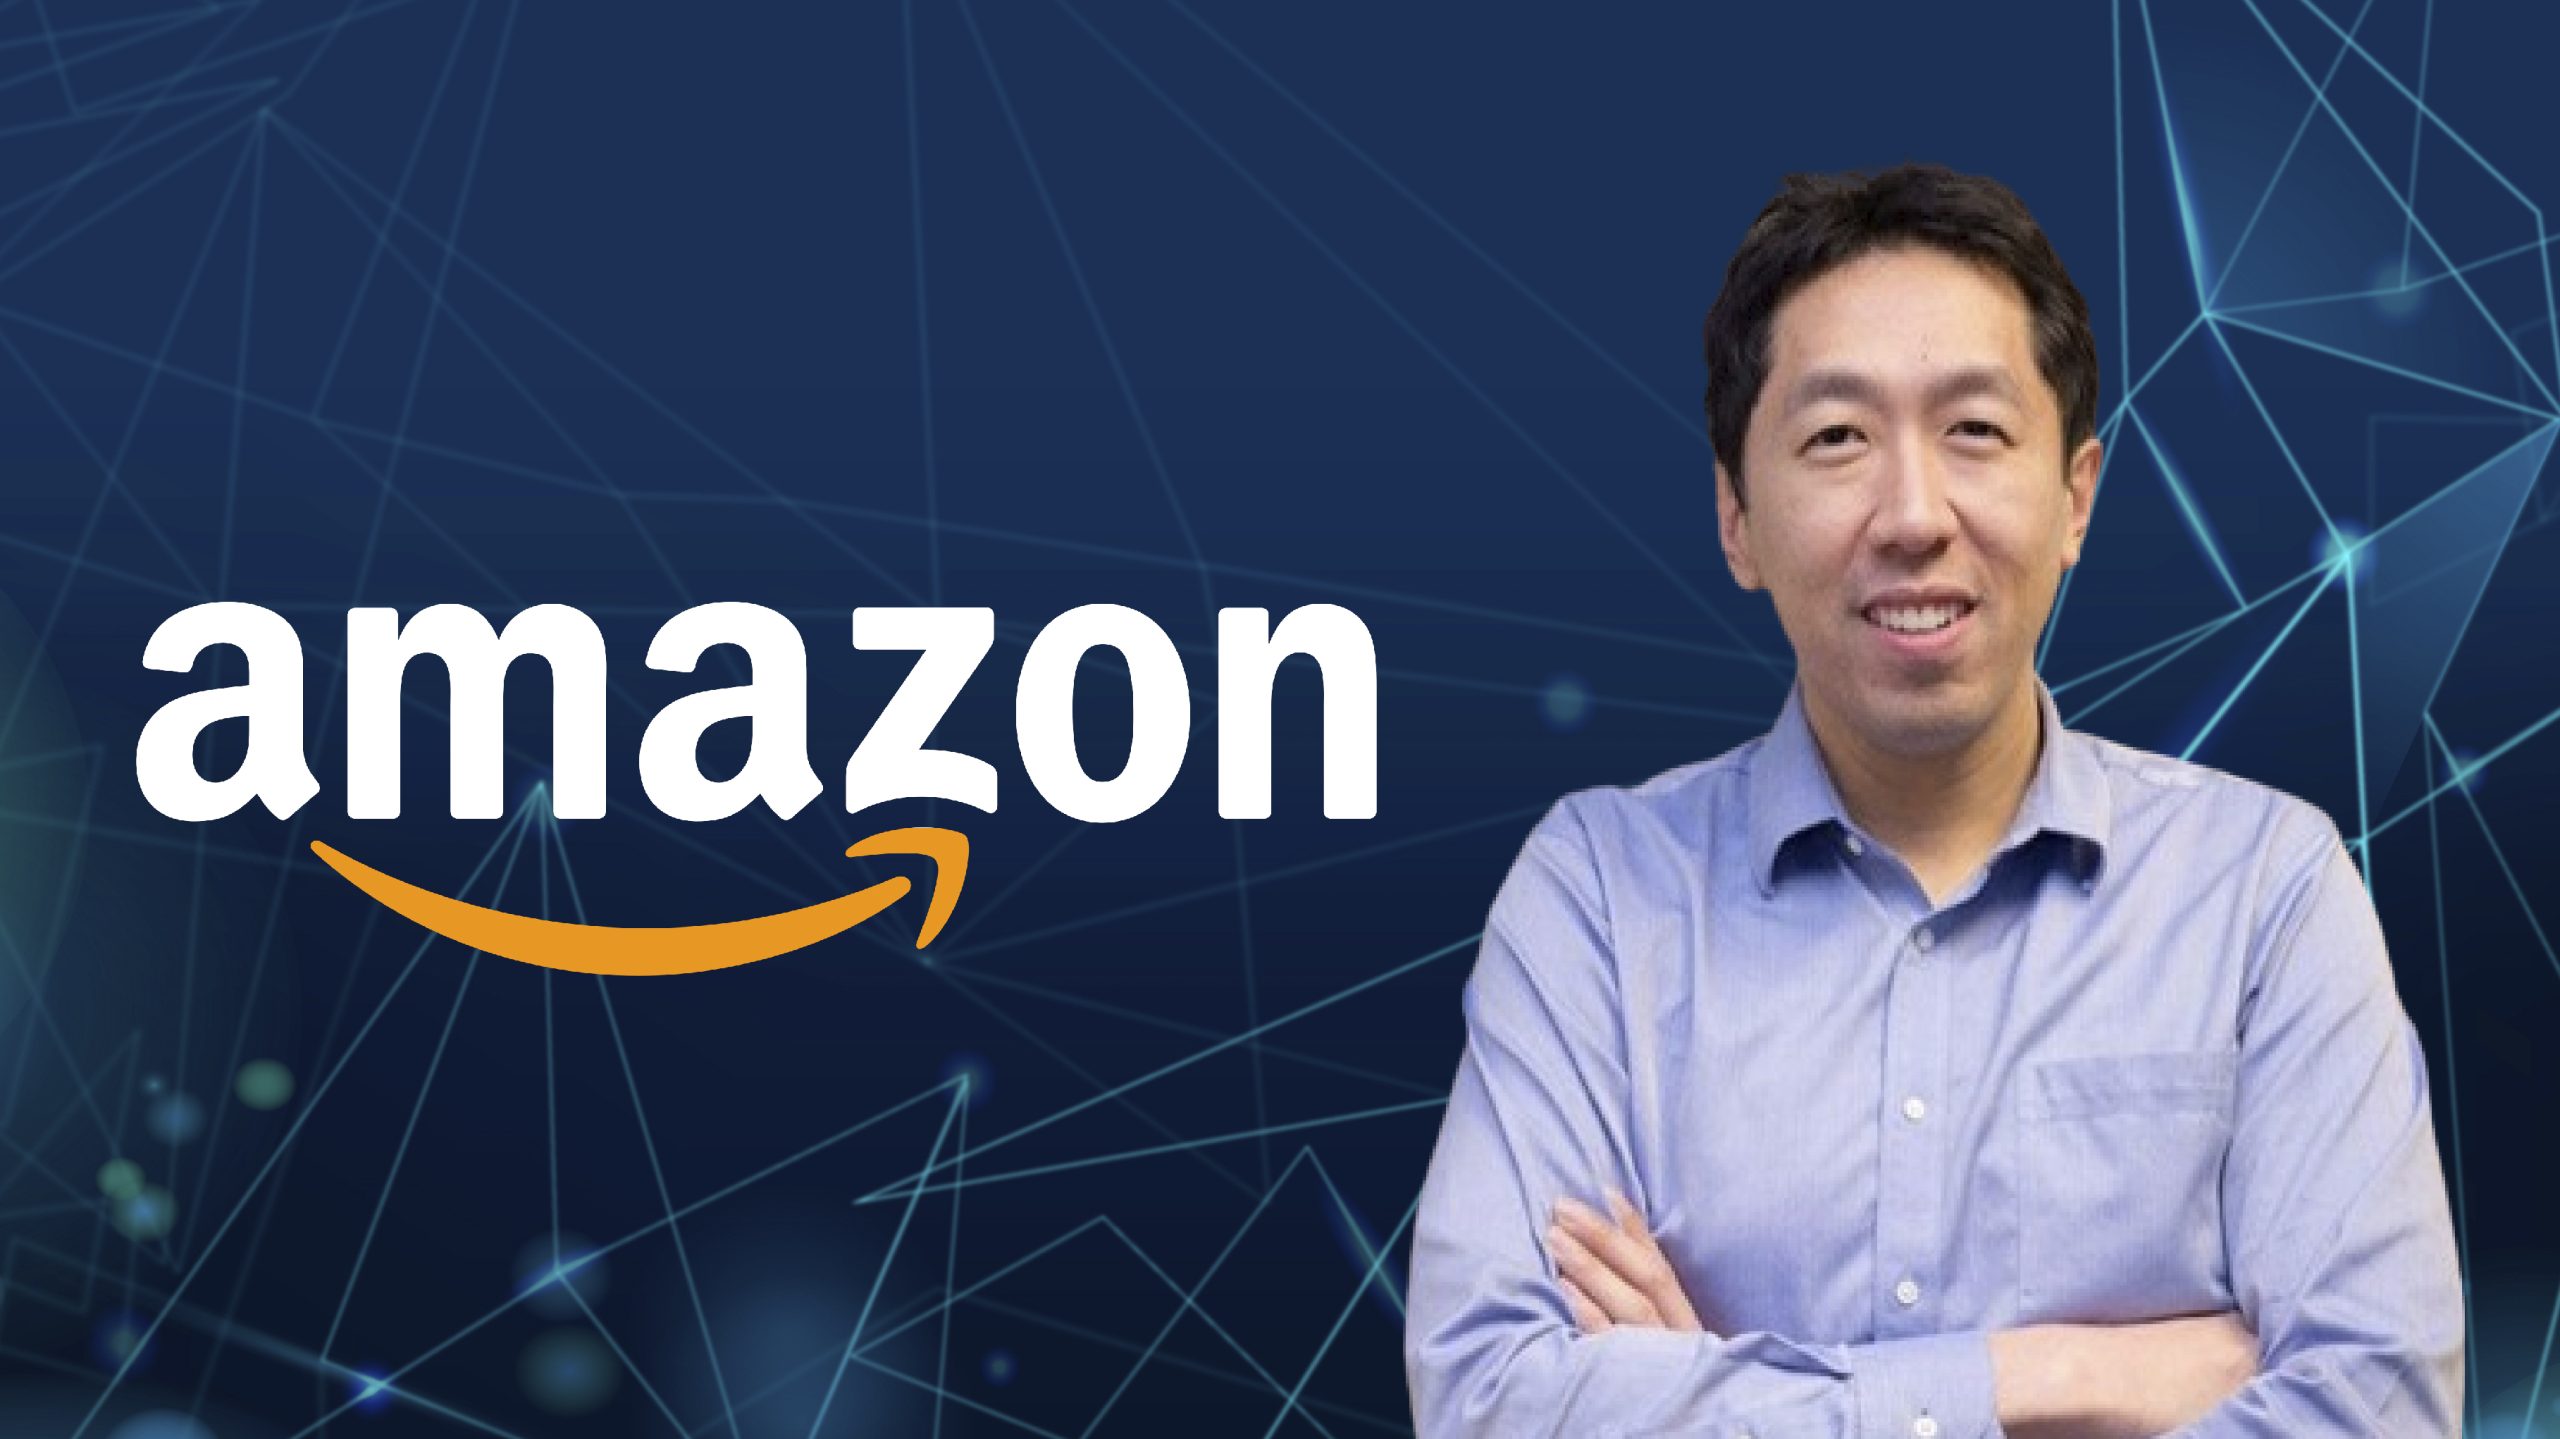 AI Giant Andrew Ng Joins Amazon Board of Directors